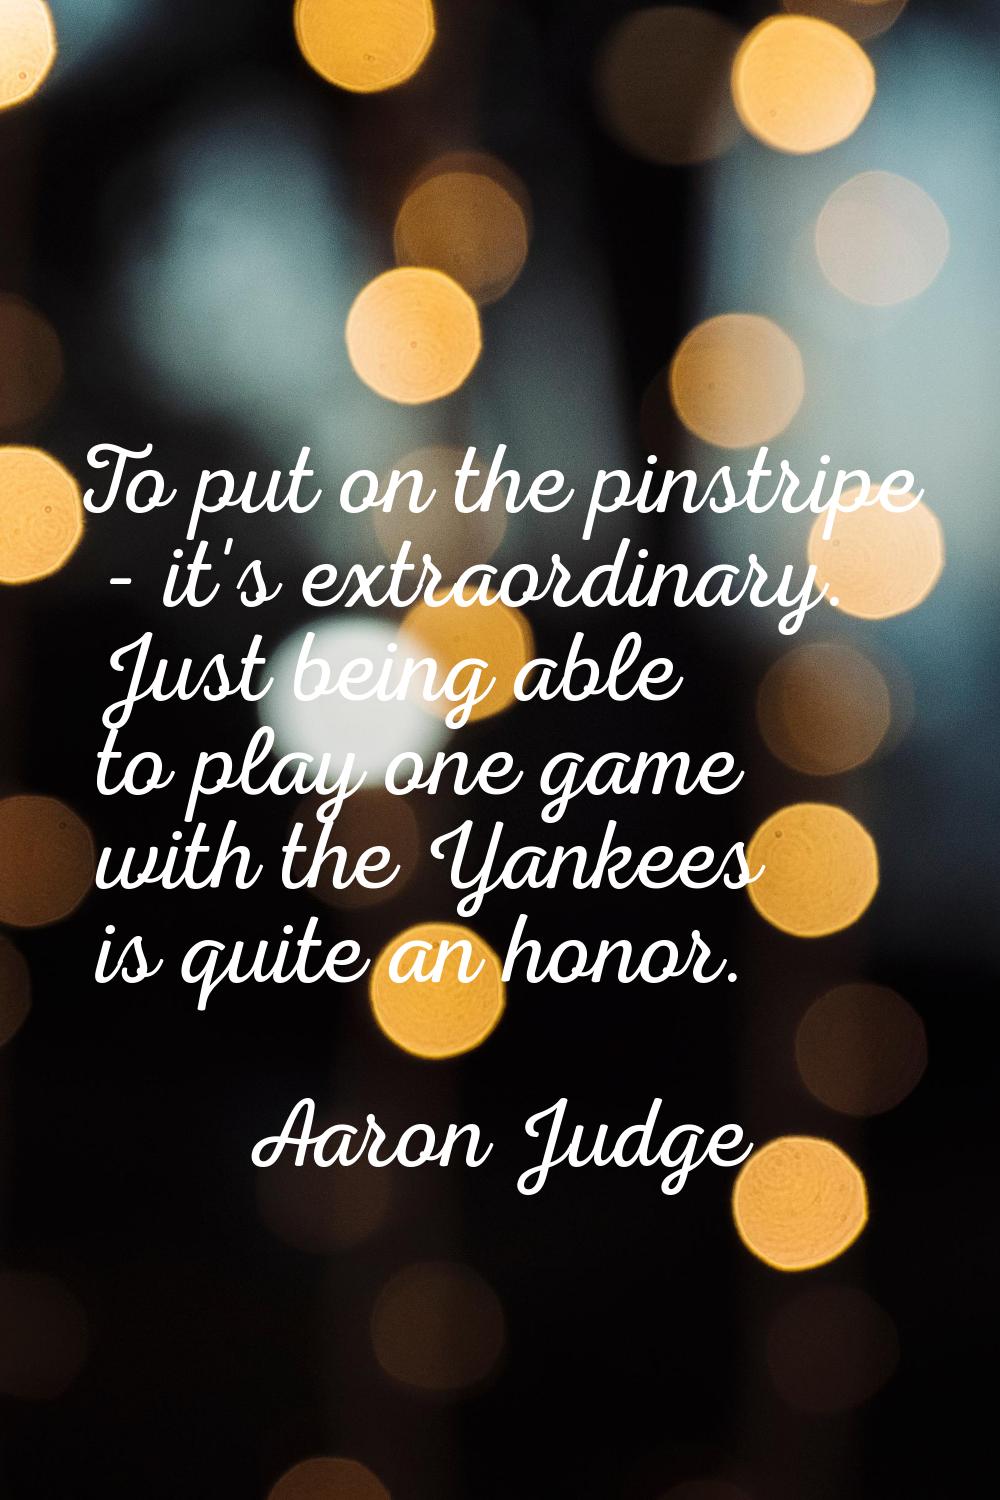 To put on the pinstripe - it's extraordinary. Just being able to play one game with the Yankees is 